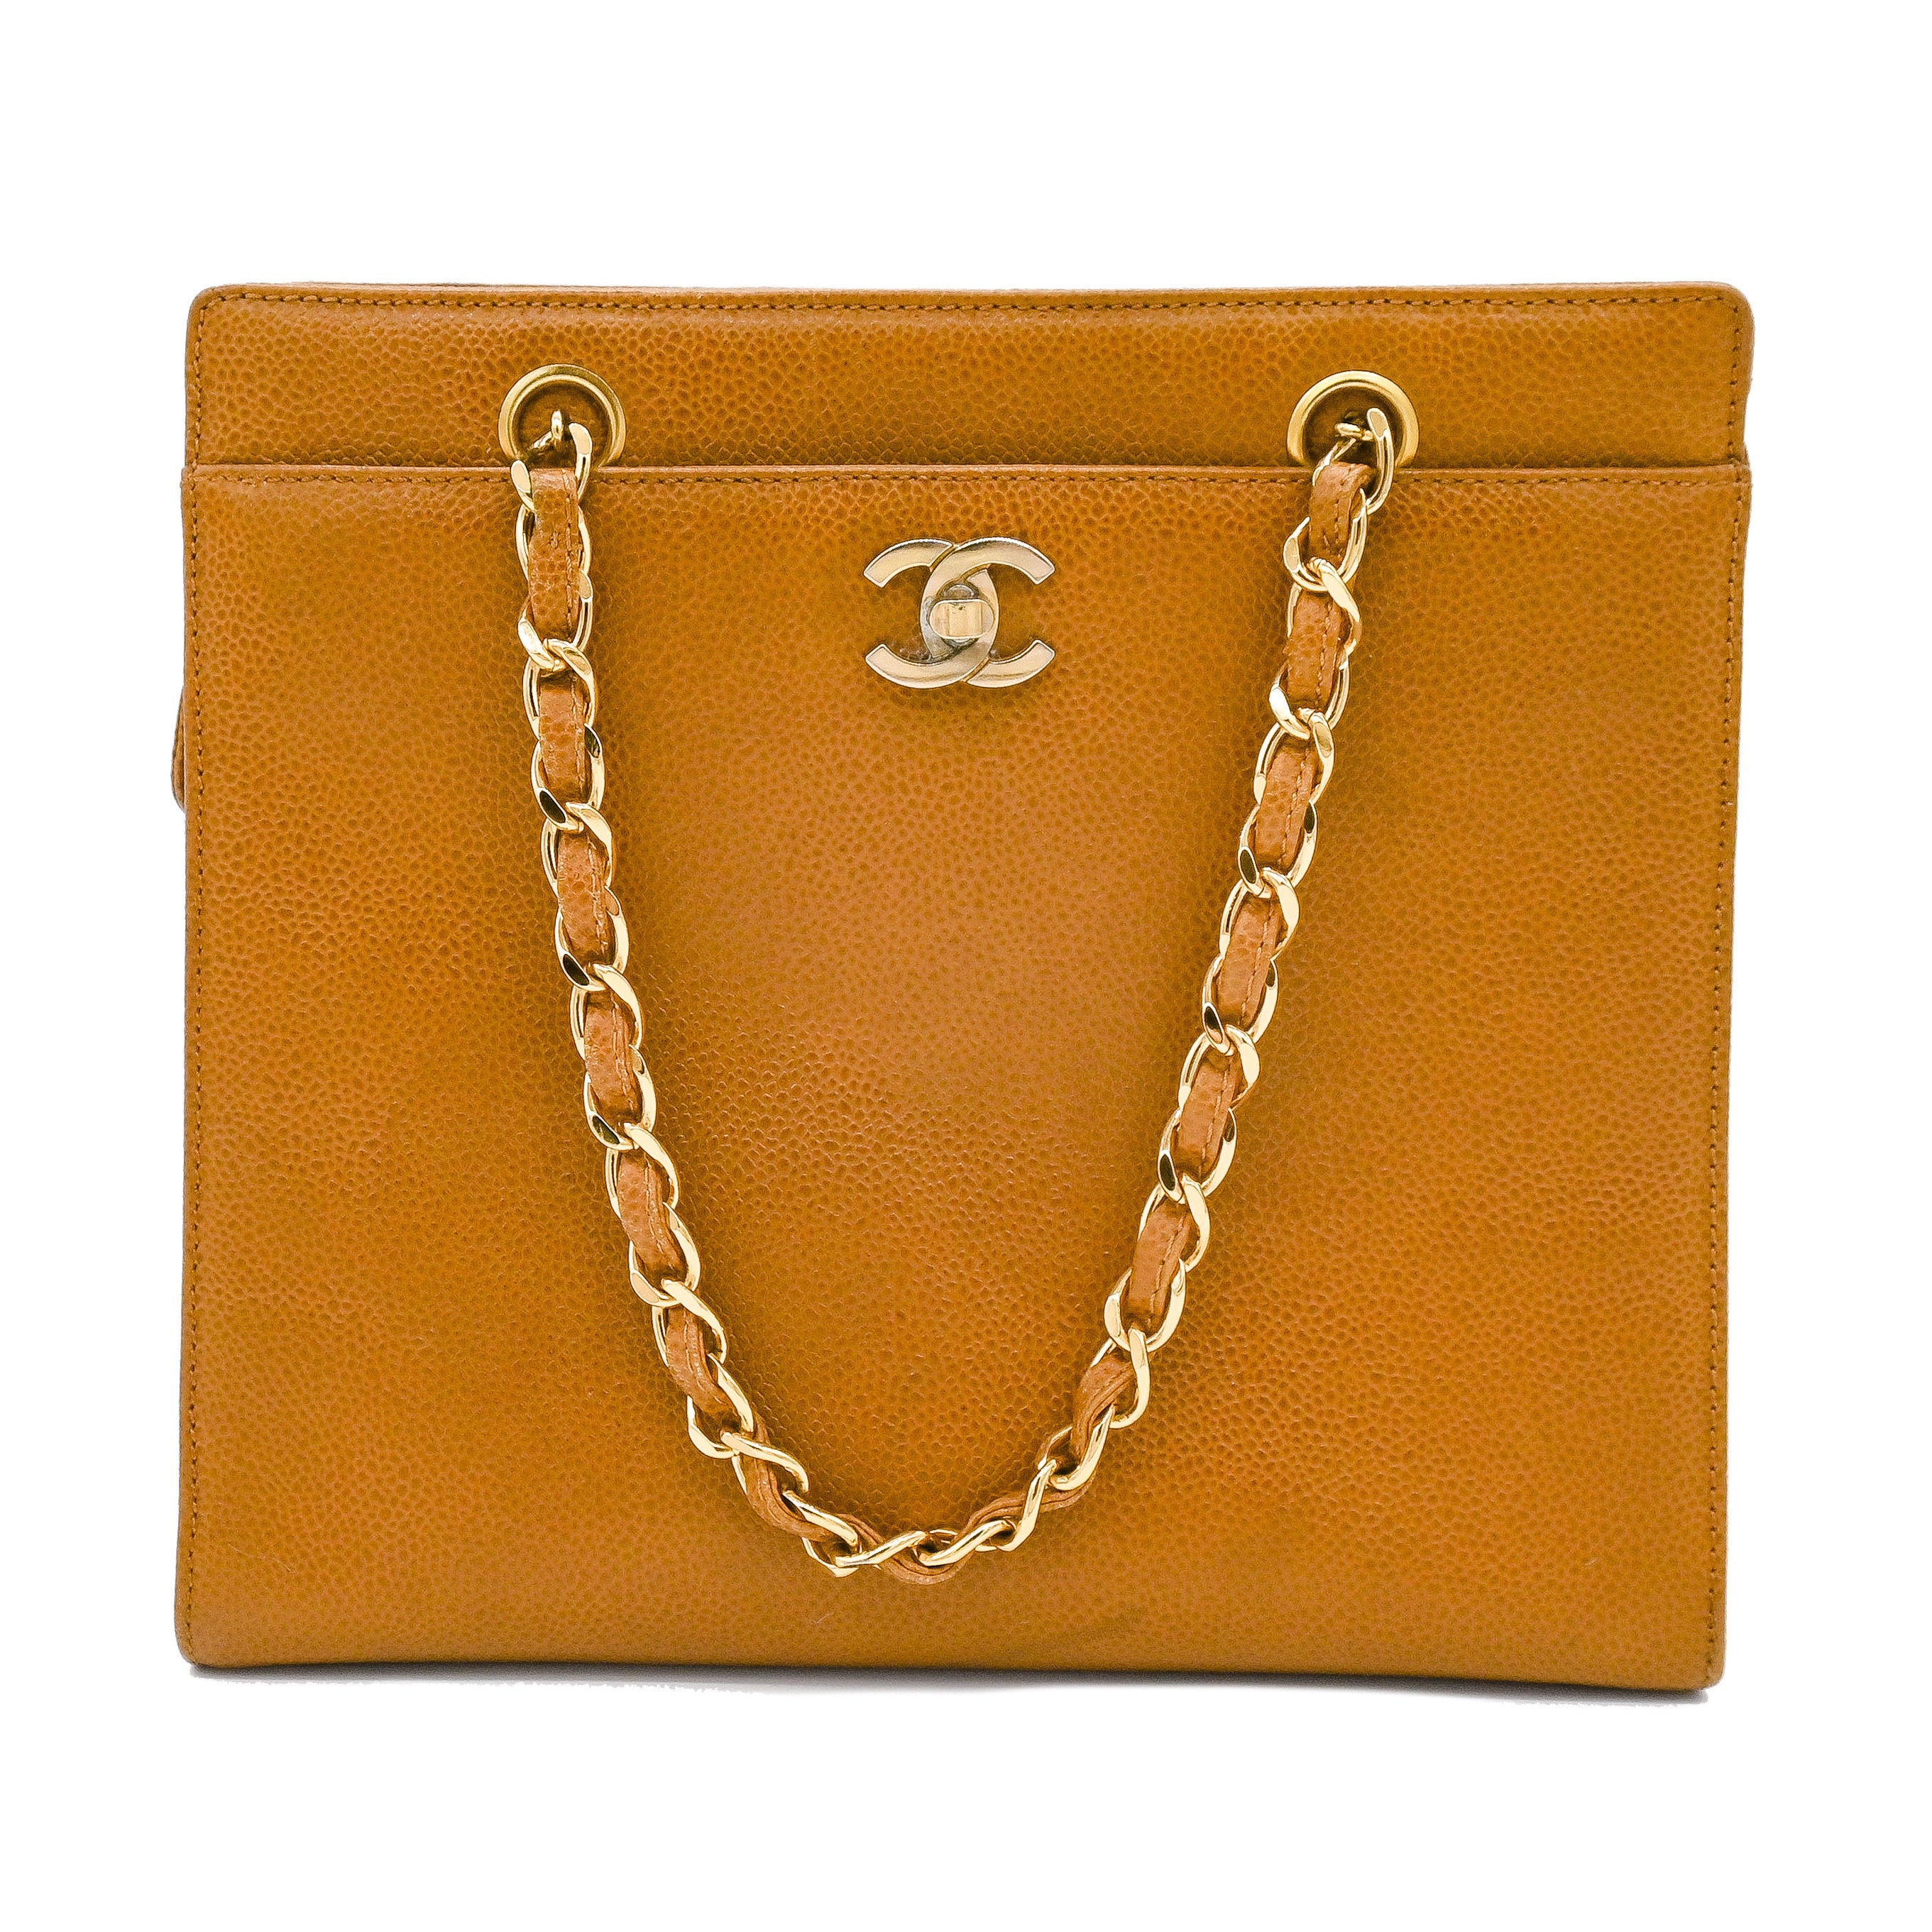 CHANEL Chanel Camel Brown Caviar Leather Vintage Tote - Vault 55